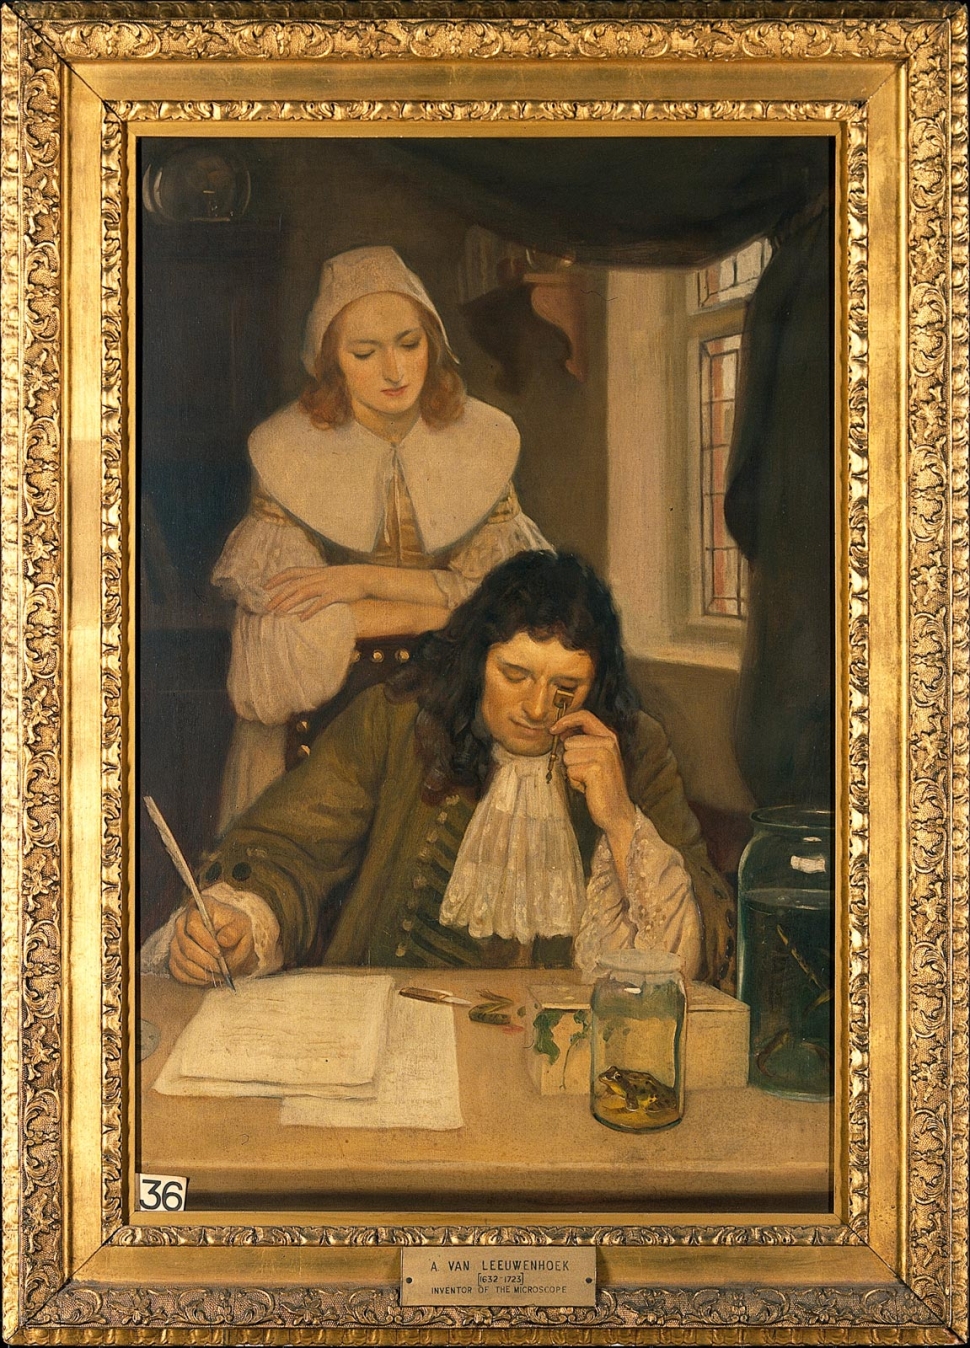 Painting of a man sitting at a desk , hand on his cheek, while writing. Another person stands behind him looking over his shoulder.